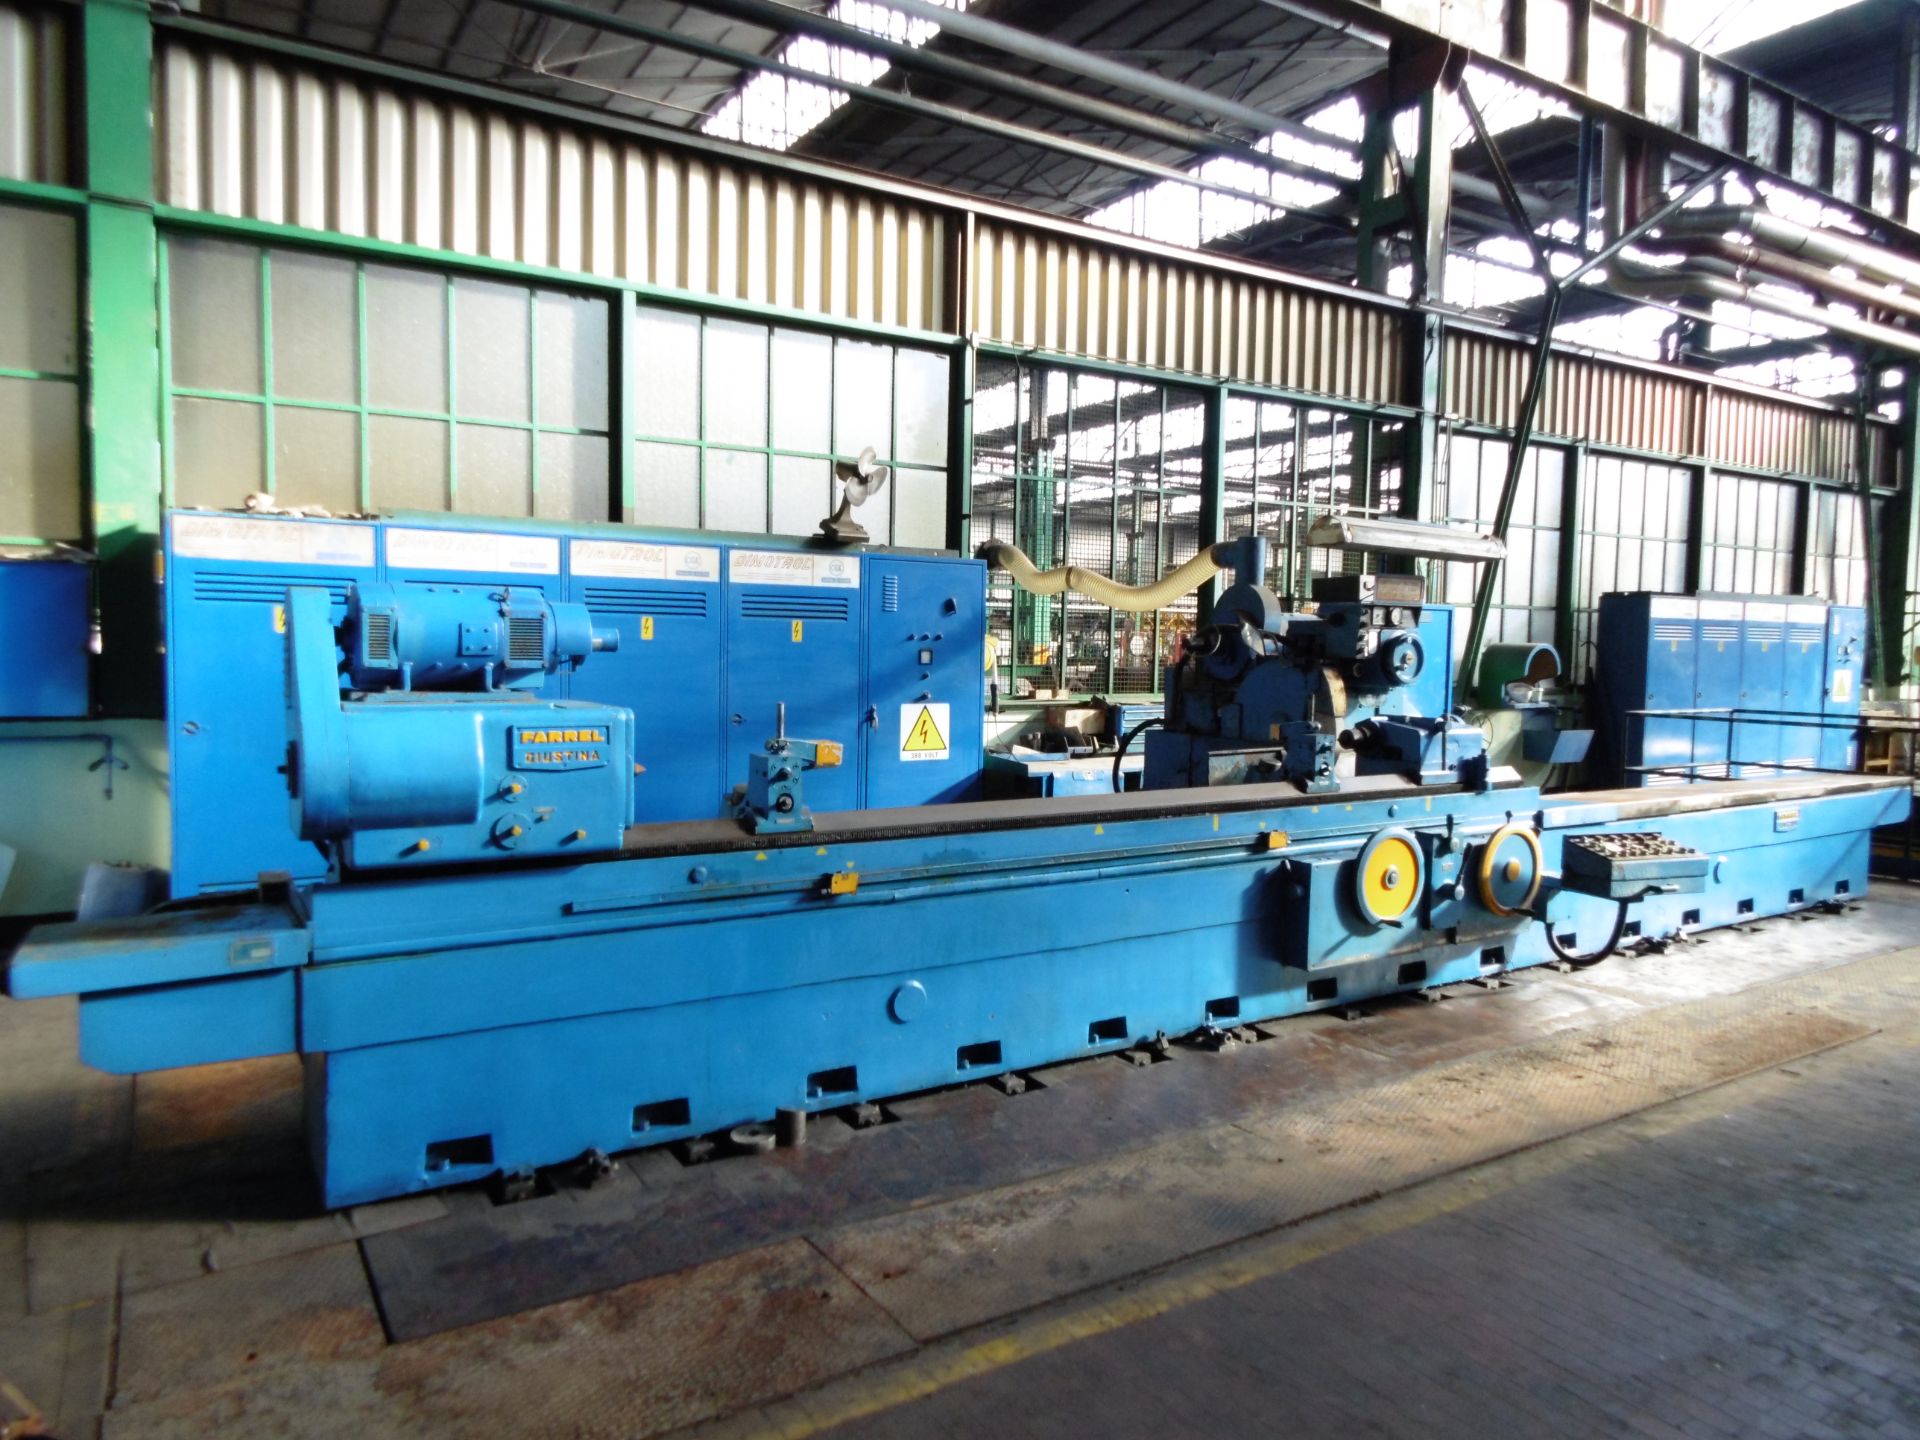 Farrel Giustina Model 431 Fixed Head Roll Grinder for Cold Mill and Foil Mill Work Rolls; Bed Length